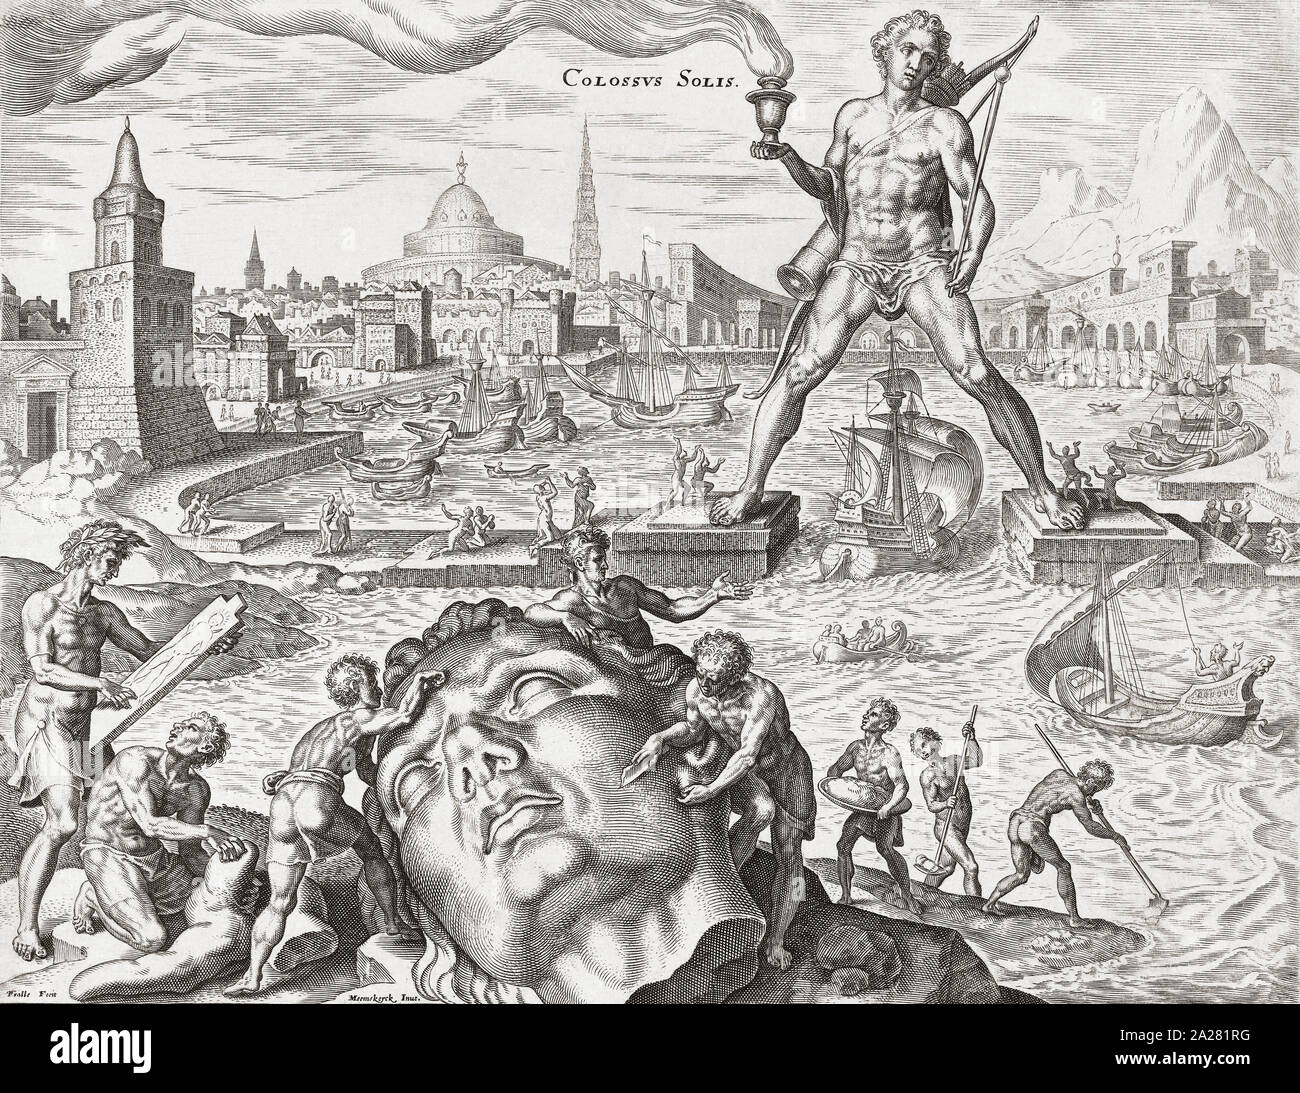 The Colossus of Rhodes, as imagined by 16th century artist Maarten van Heemskerck.  The statue of the sun god Helios is said to have stood 33 metres (108 feet) high.  It is counted amongst the seven wonders of the ancient world. Stock Photo